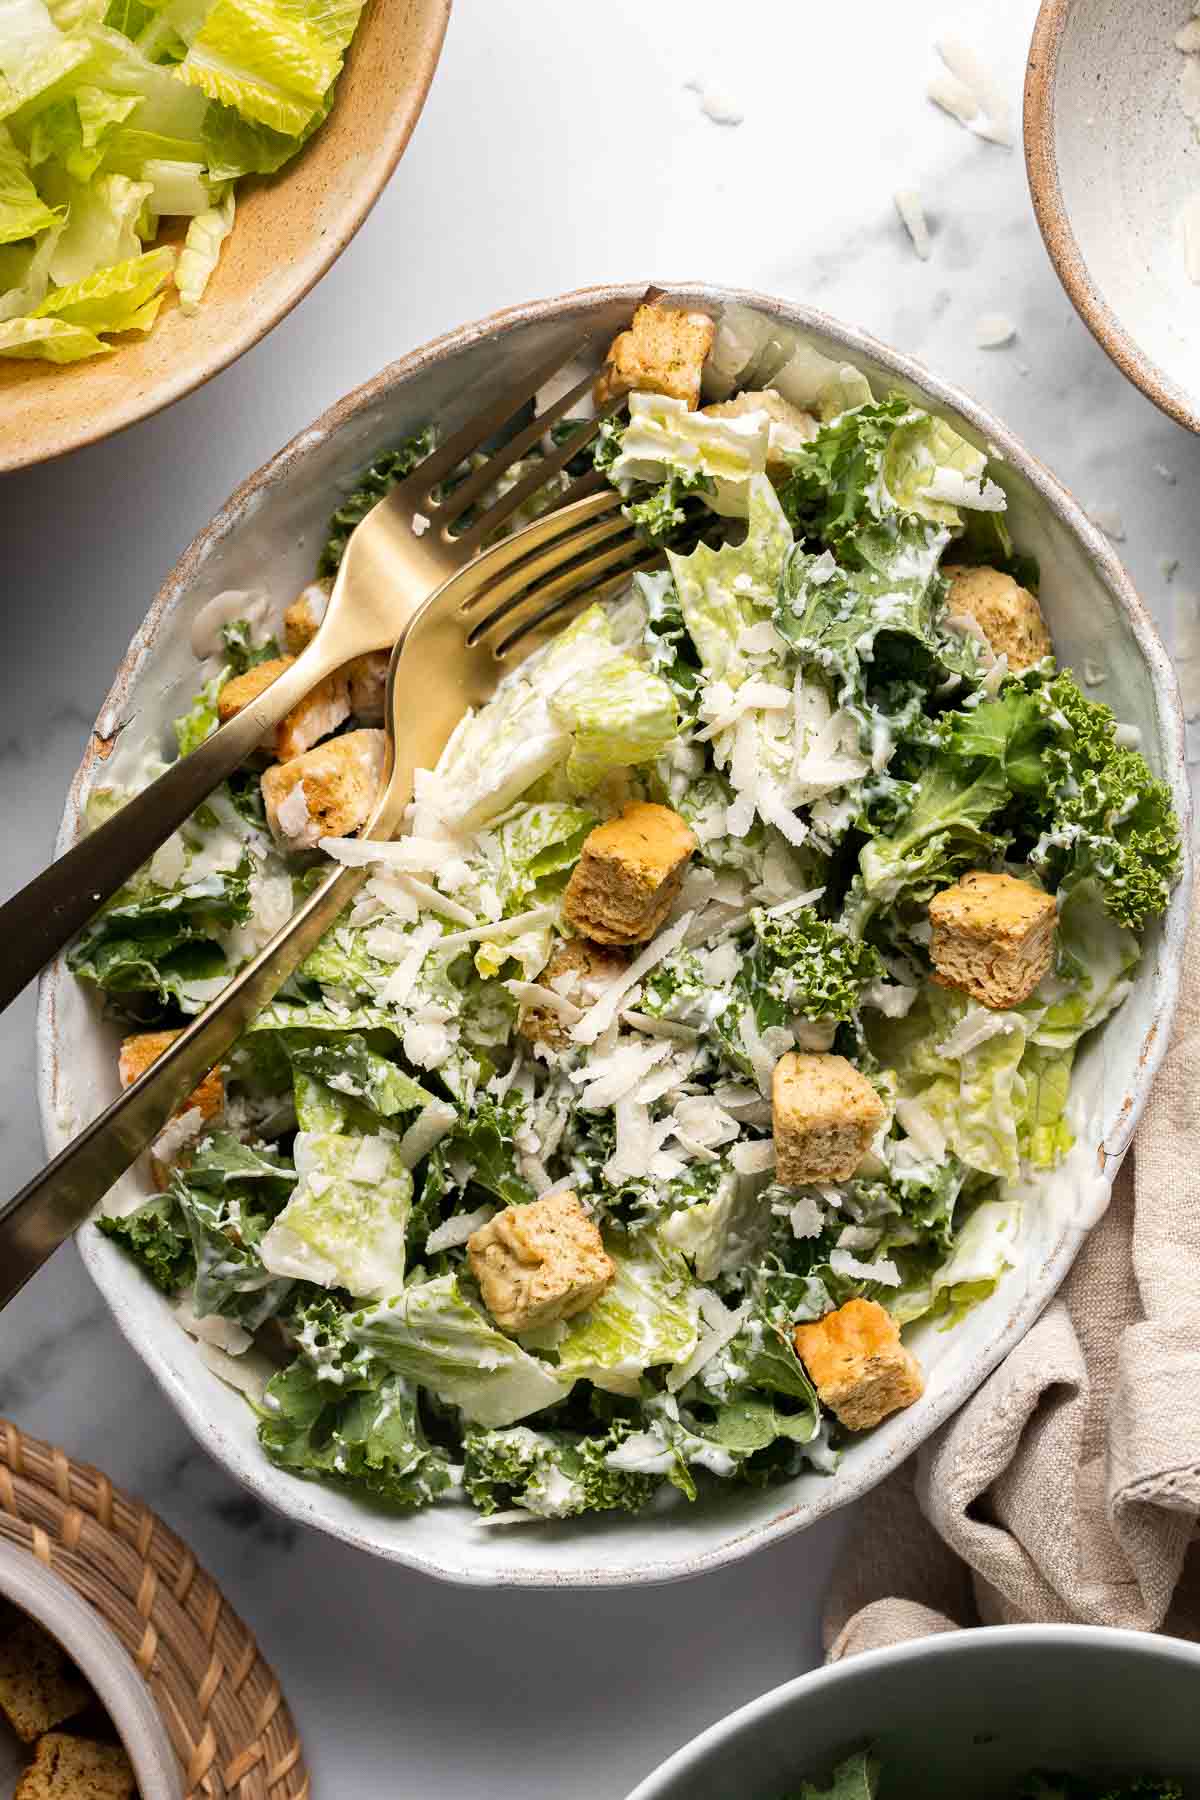 Kale Caesar Salad is a delicious, healthy twist on classic Caesar salad with all the traditional flavors but added crunch and rich earthiness of fresh kale. | aheadofthyme.com